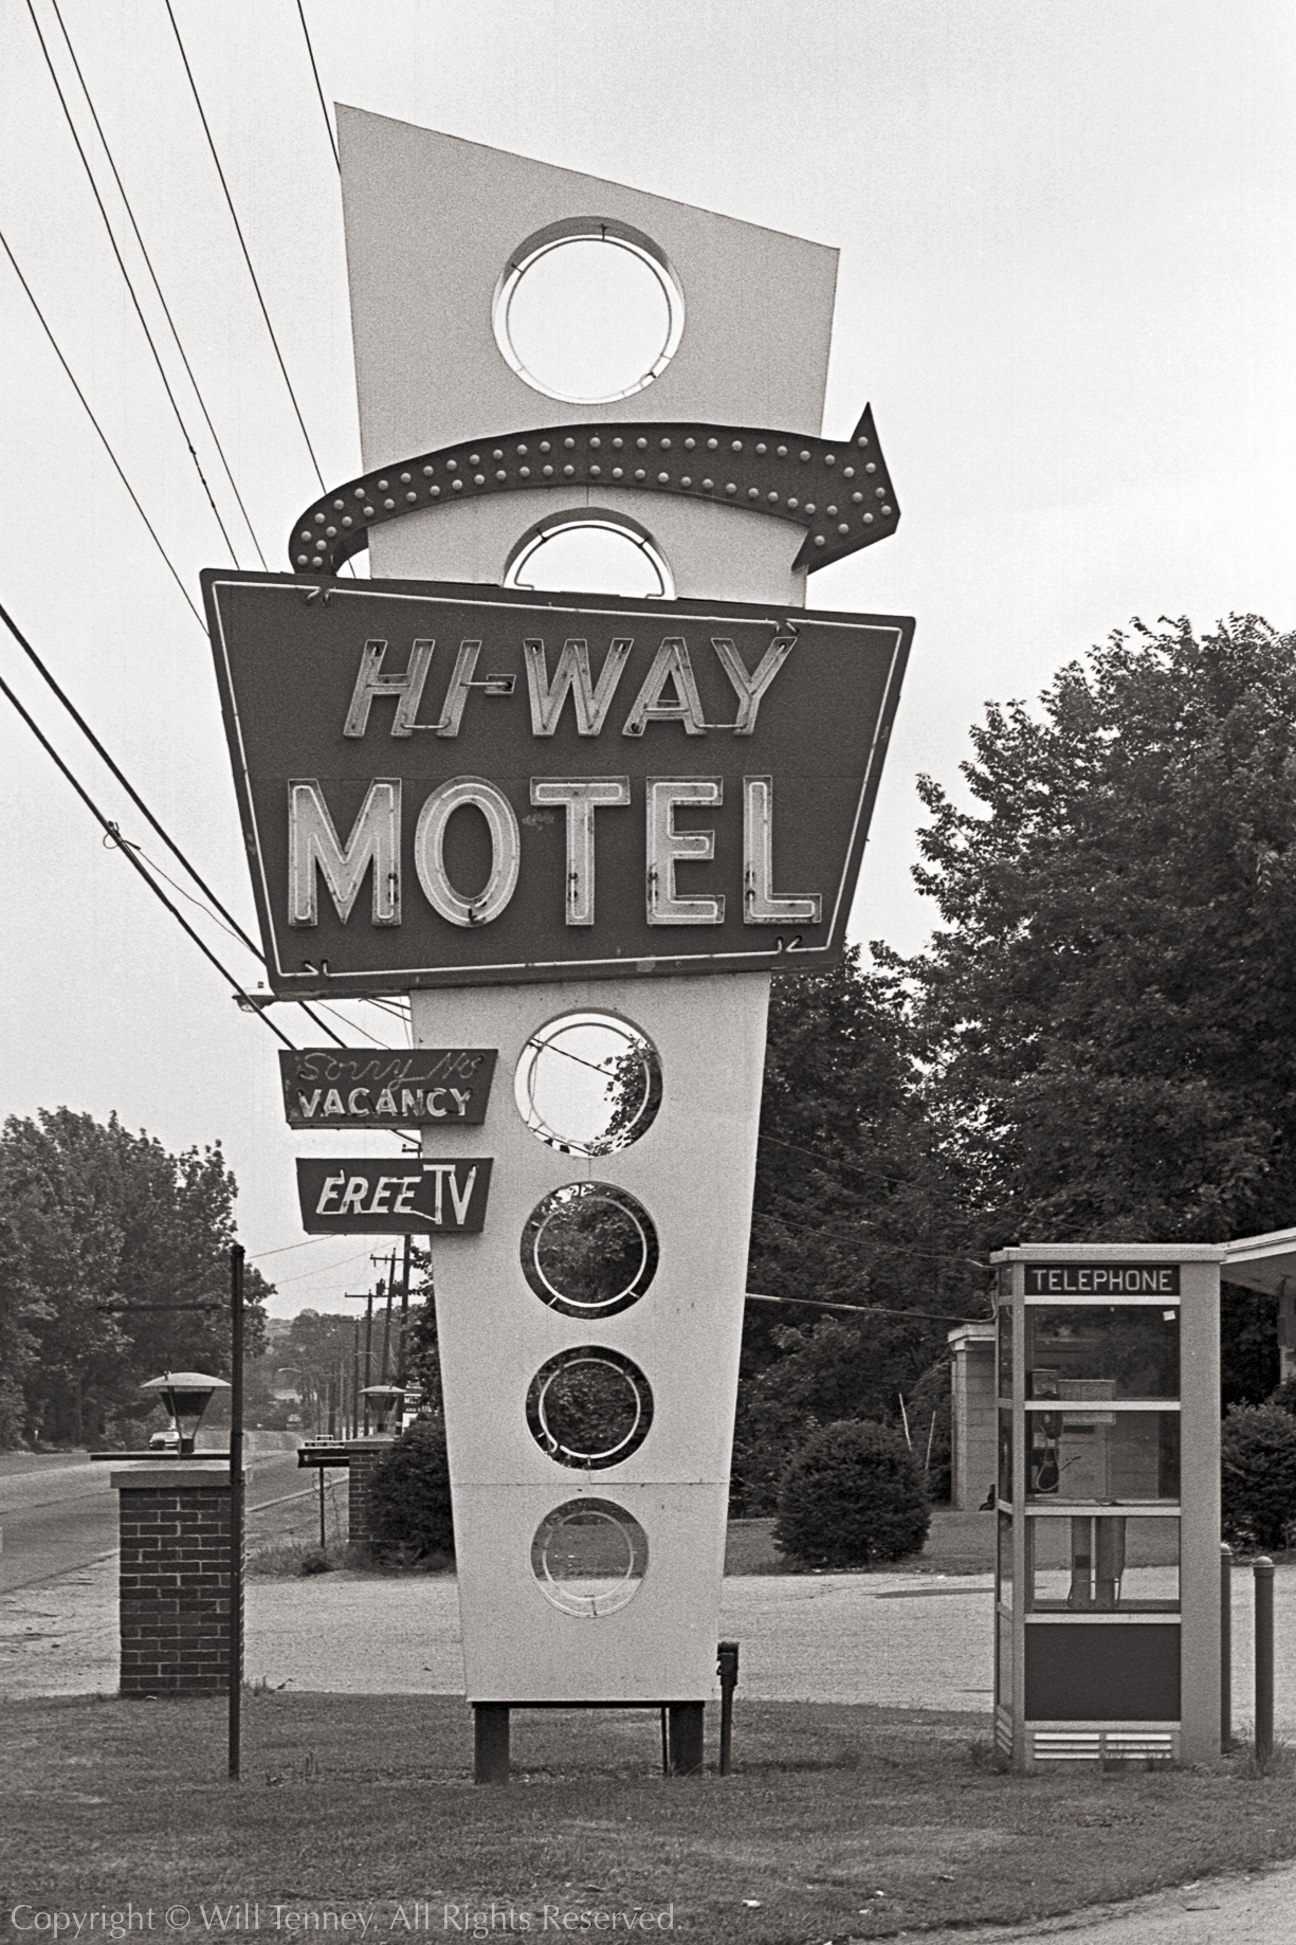 Hi-Way Motel: Photograph by Will Tenney